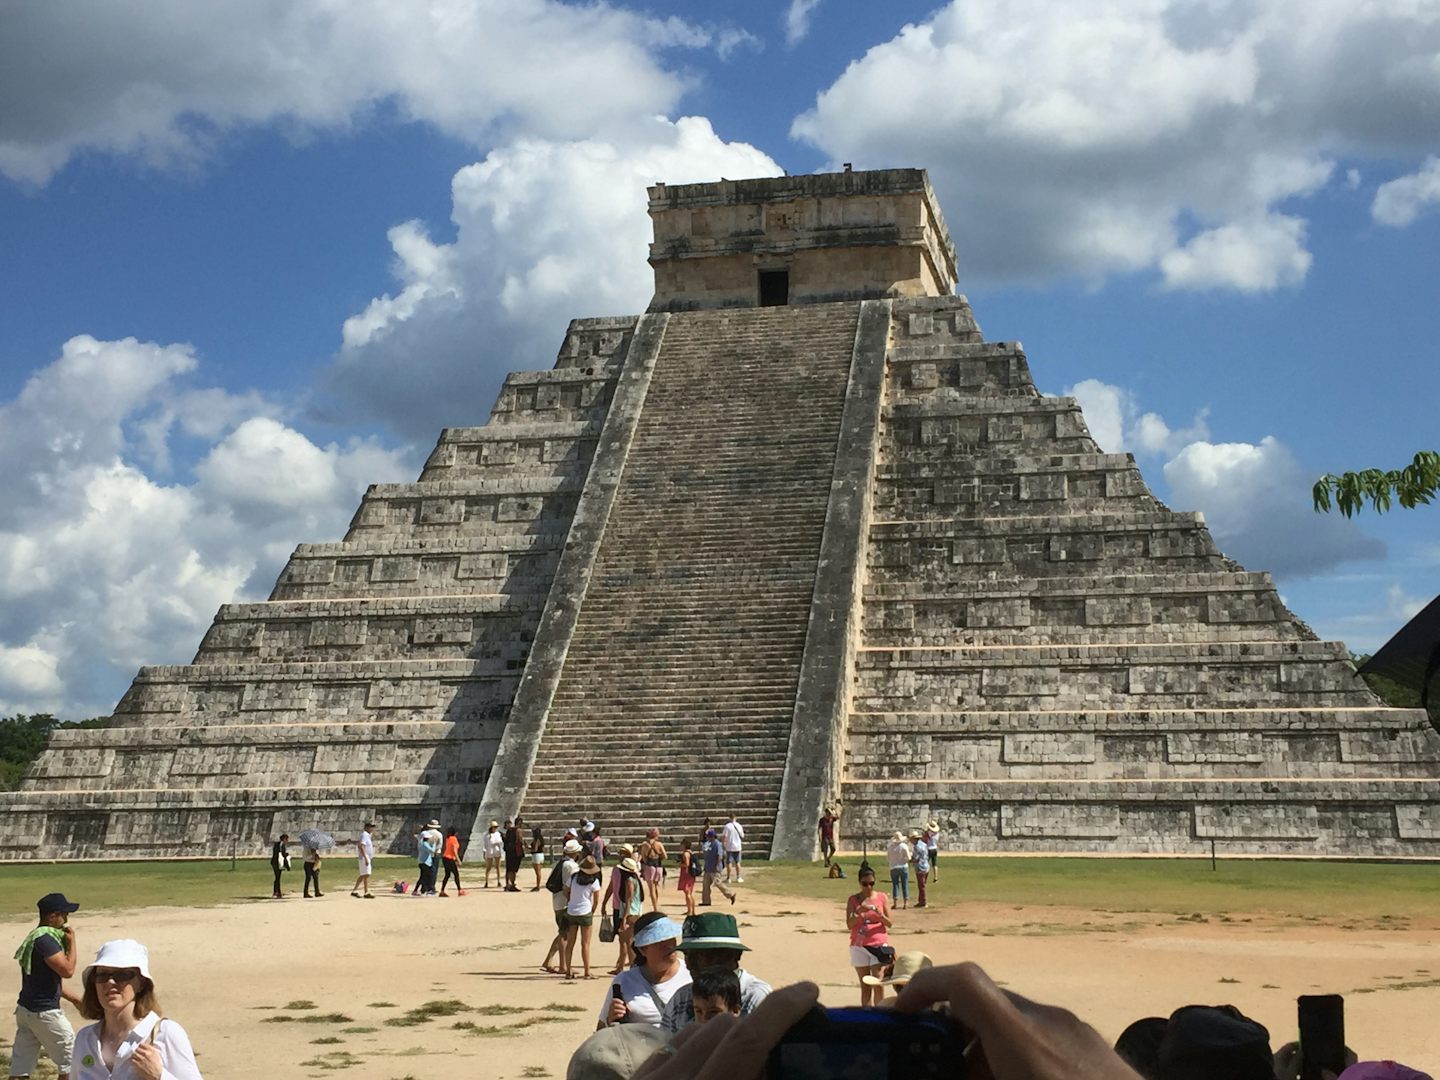 The tour chichen itza. Well worth it to see this site